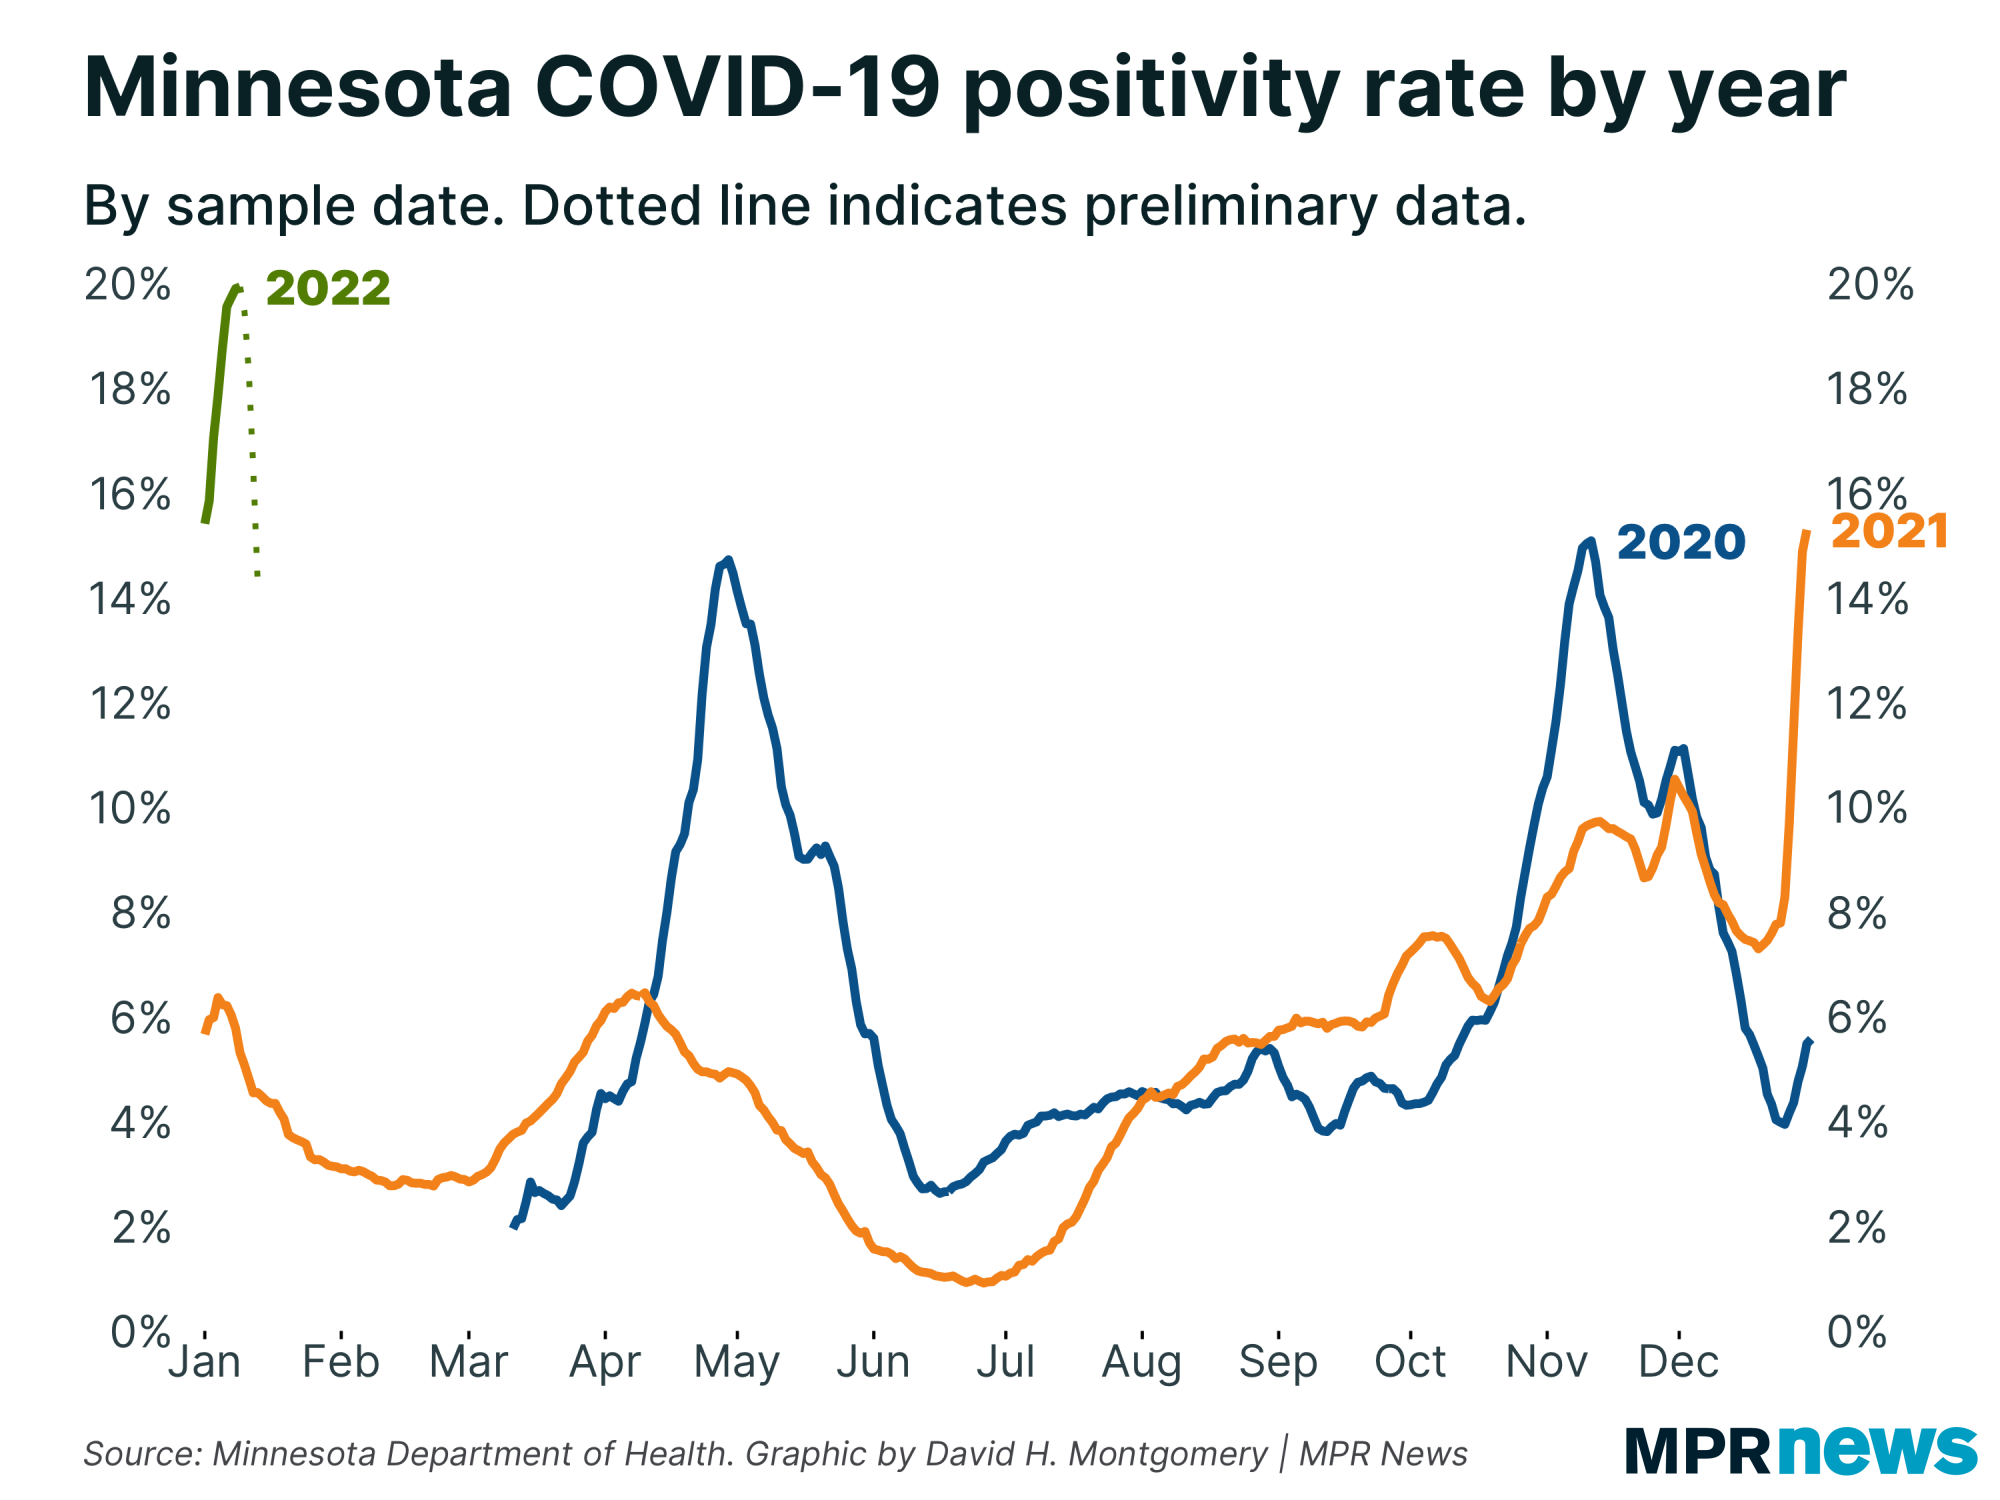 Graph of Minnesota's COVID-19 positivity rate by year